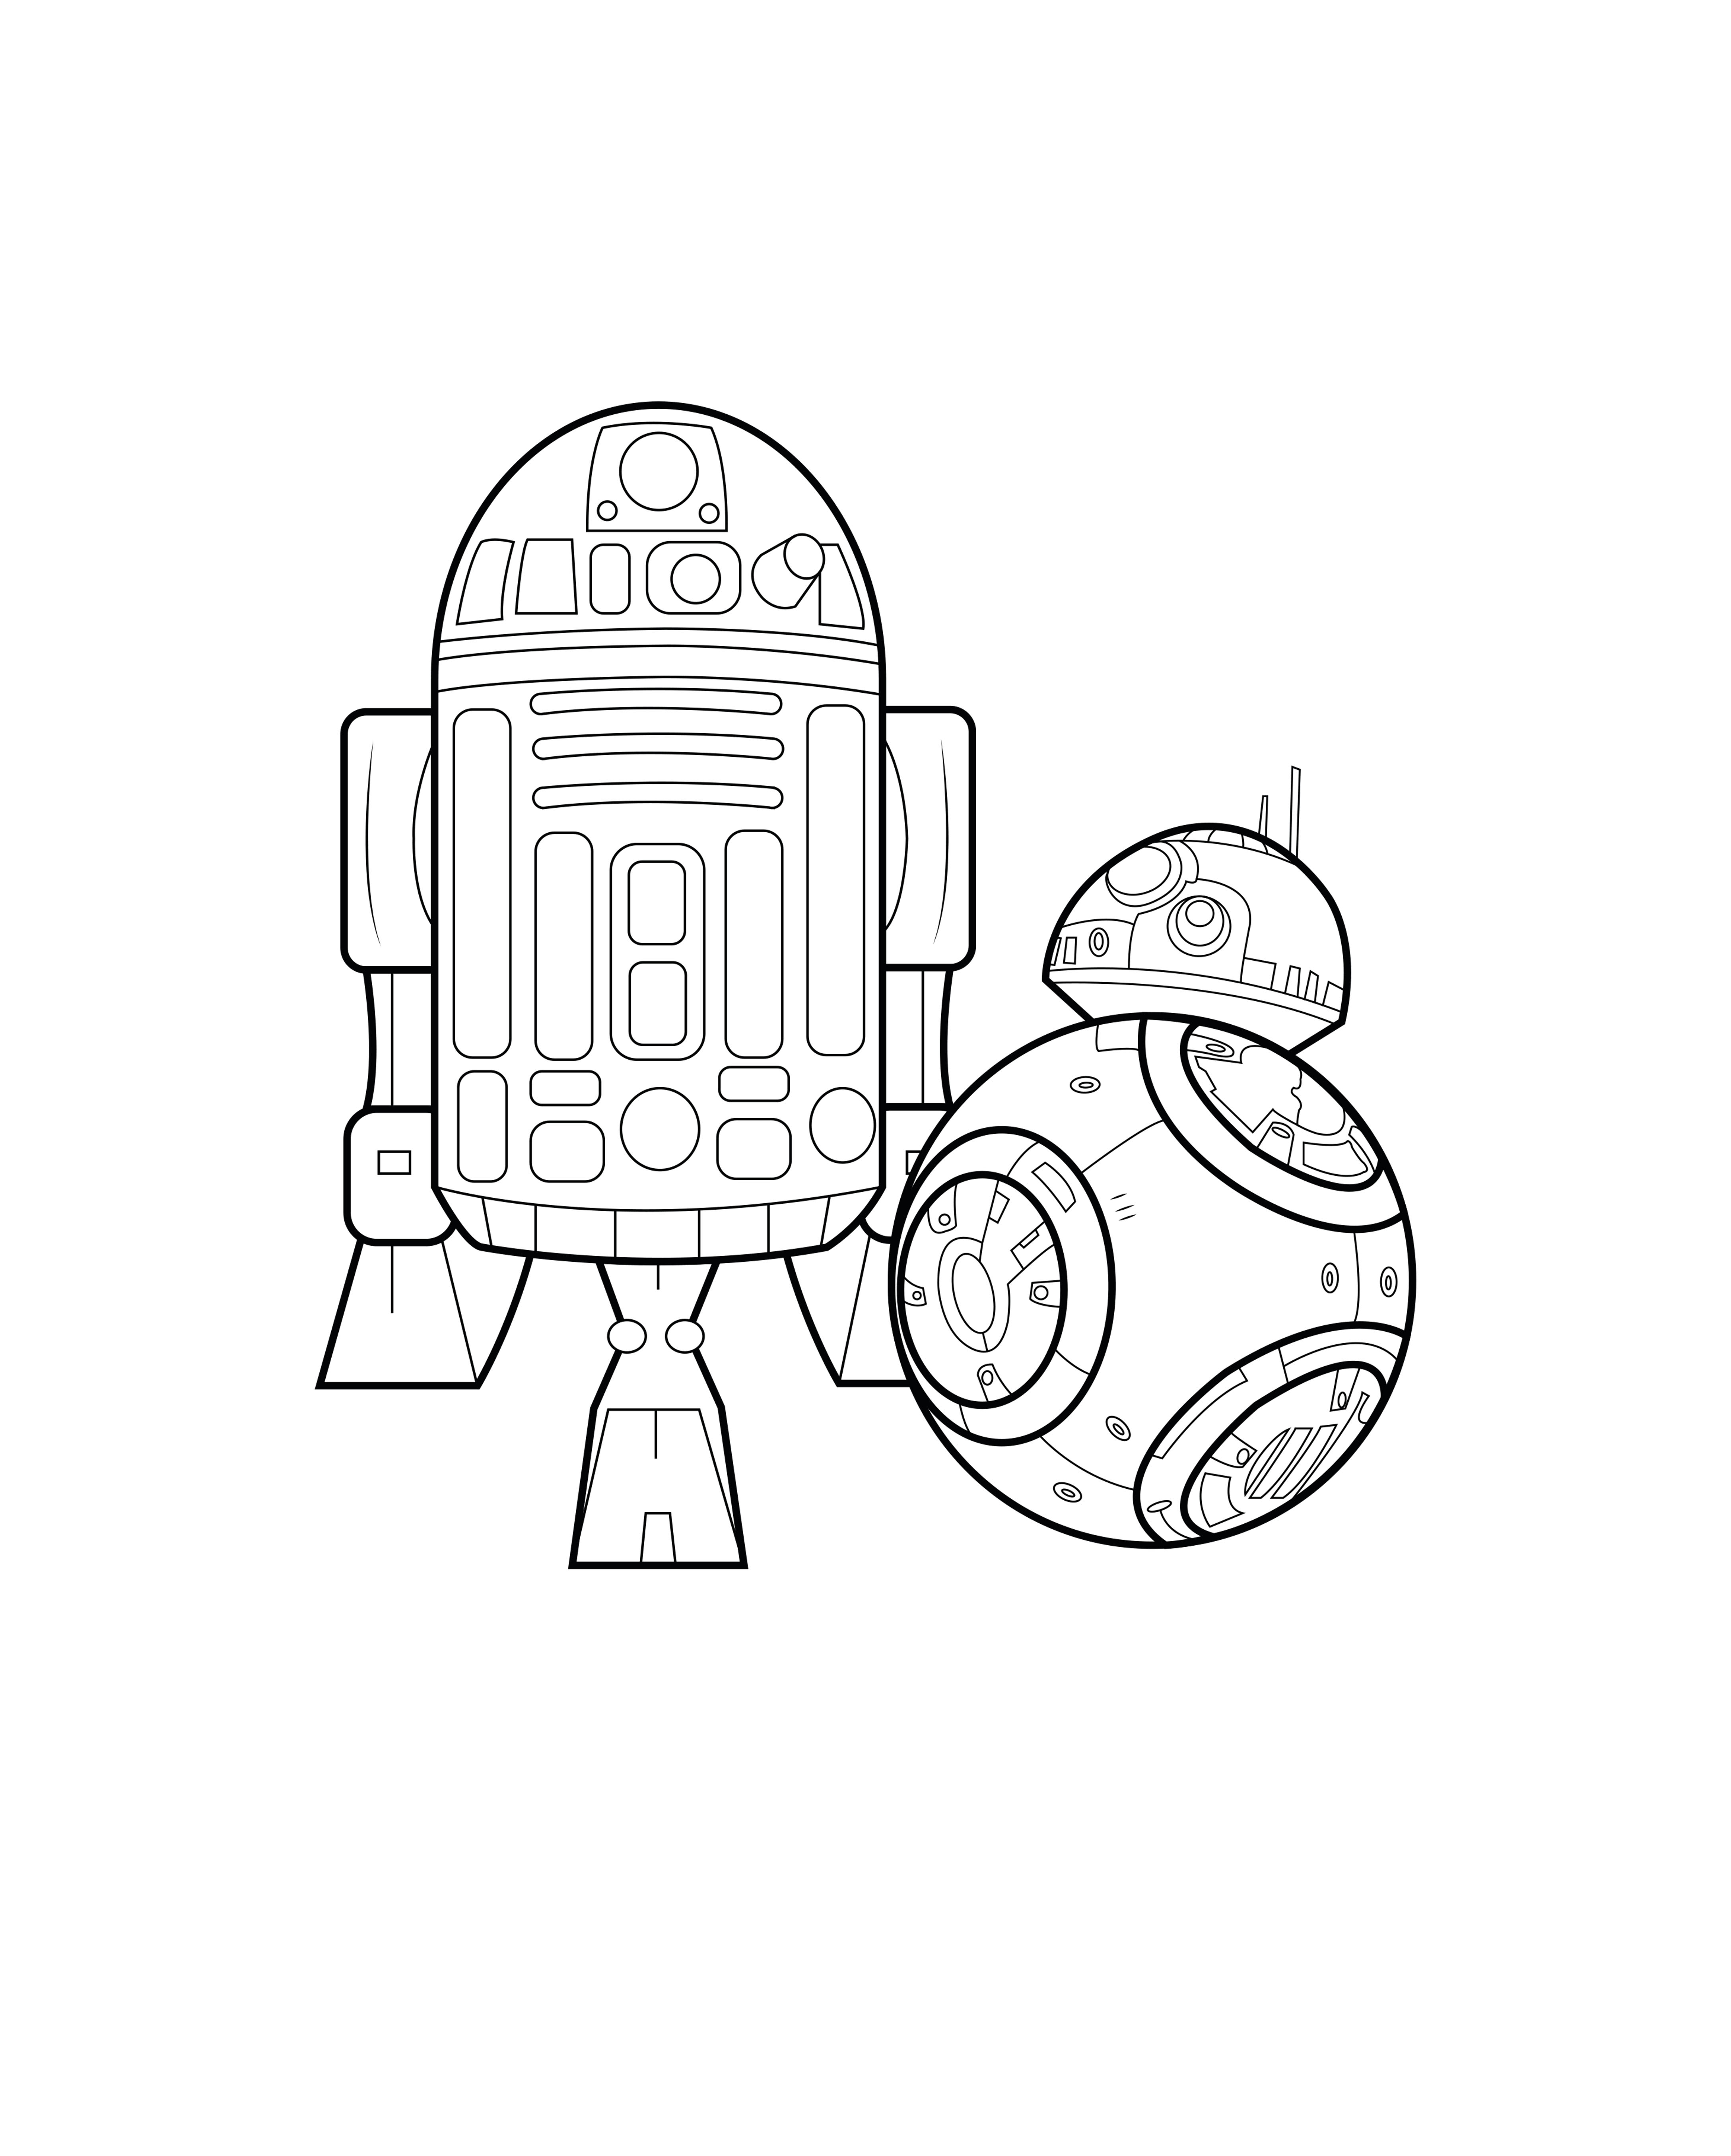 Coloring page inspired by Star Wars featuring BB8 and R2D2, Artist : Allan